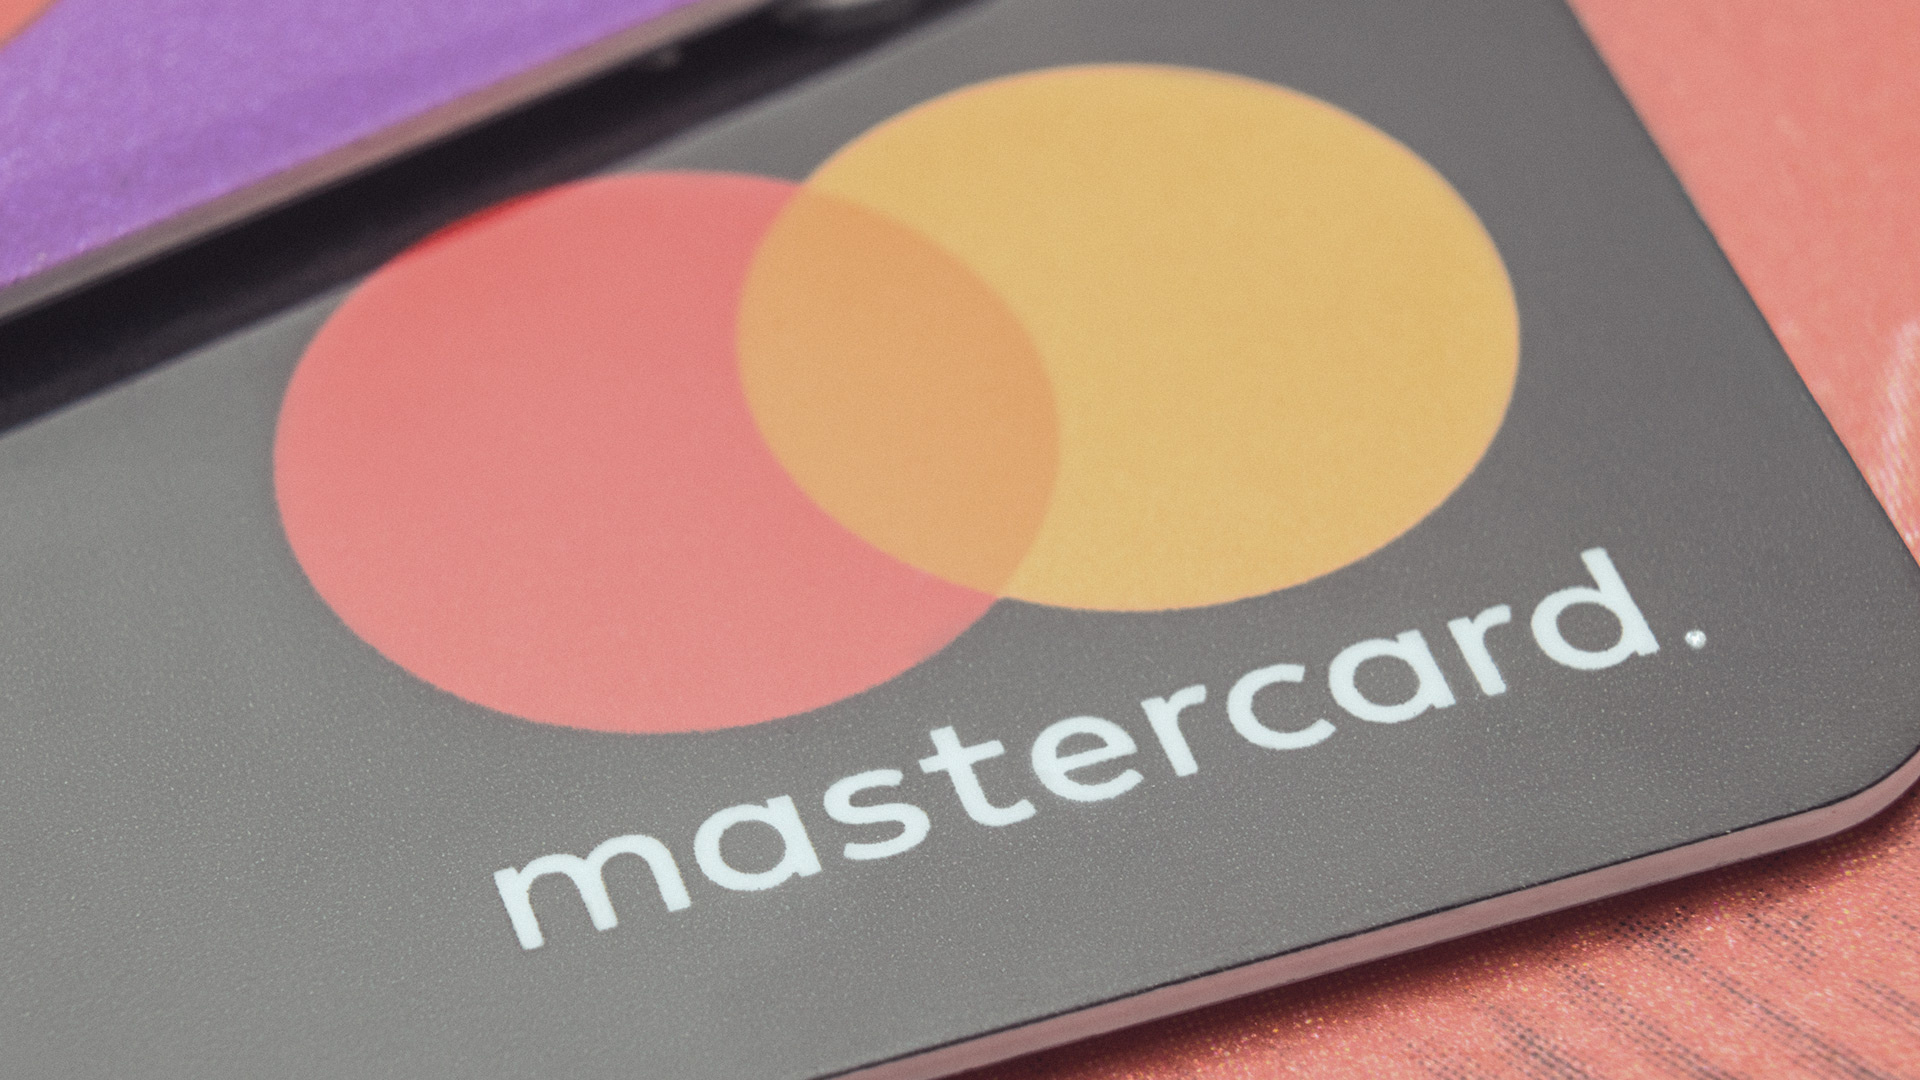 Mastercard: Celebrating the 50th birthday in 2016, Started in California as Interbank Card Association. 1920x1080 Full HD Wallpaper.